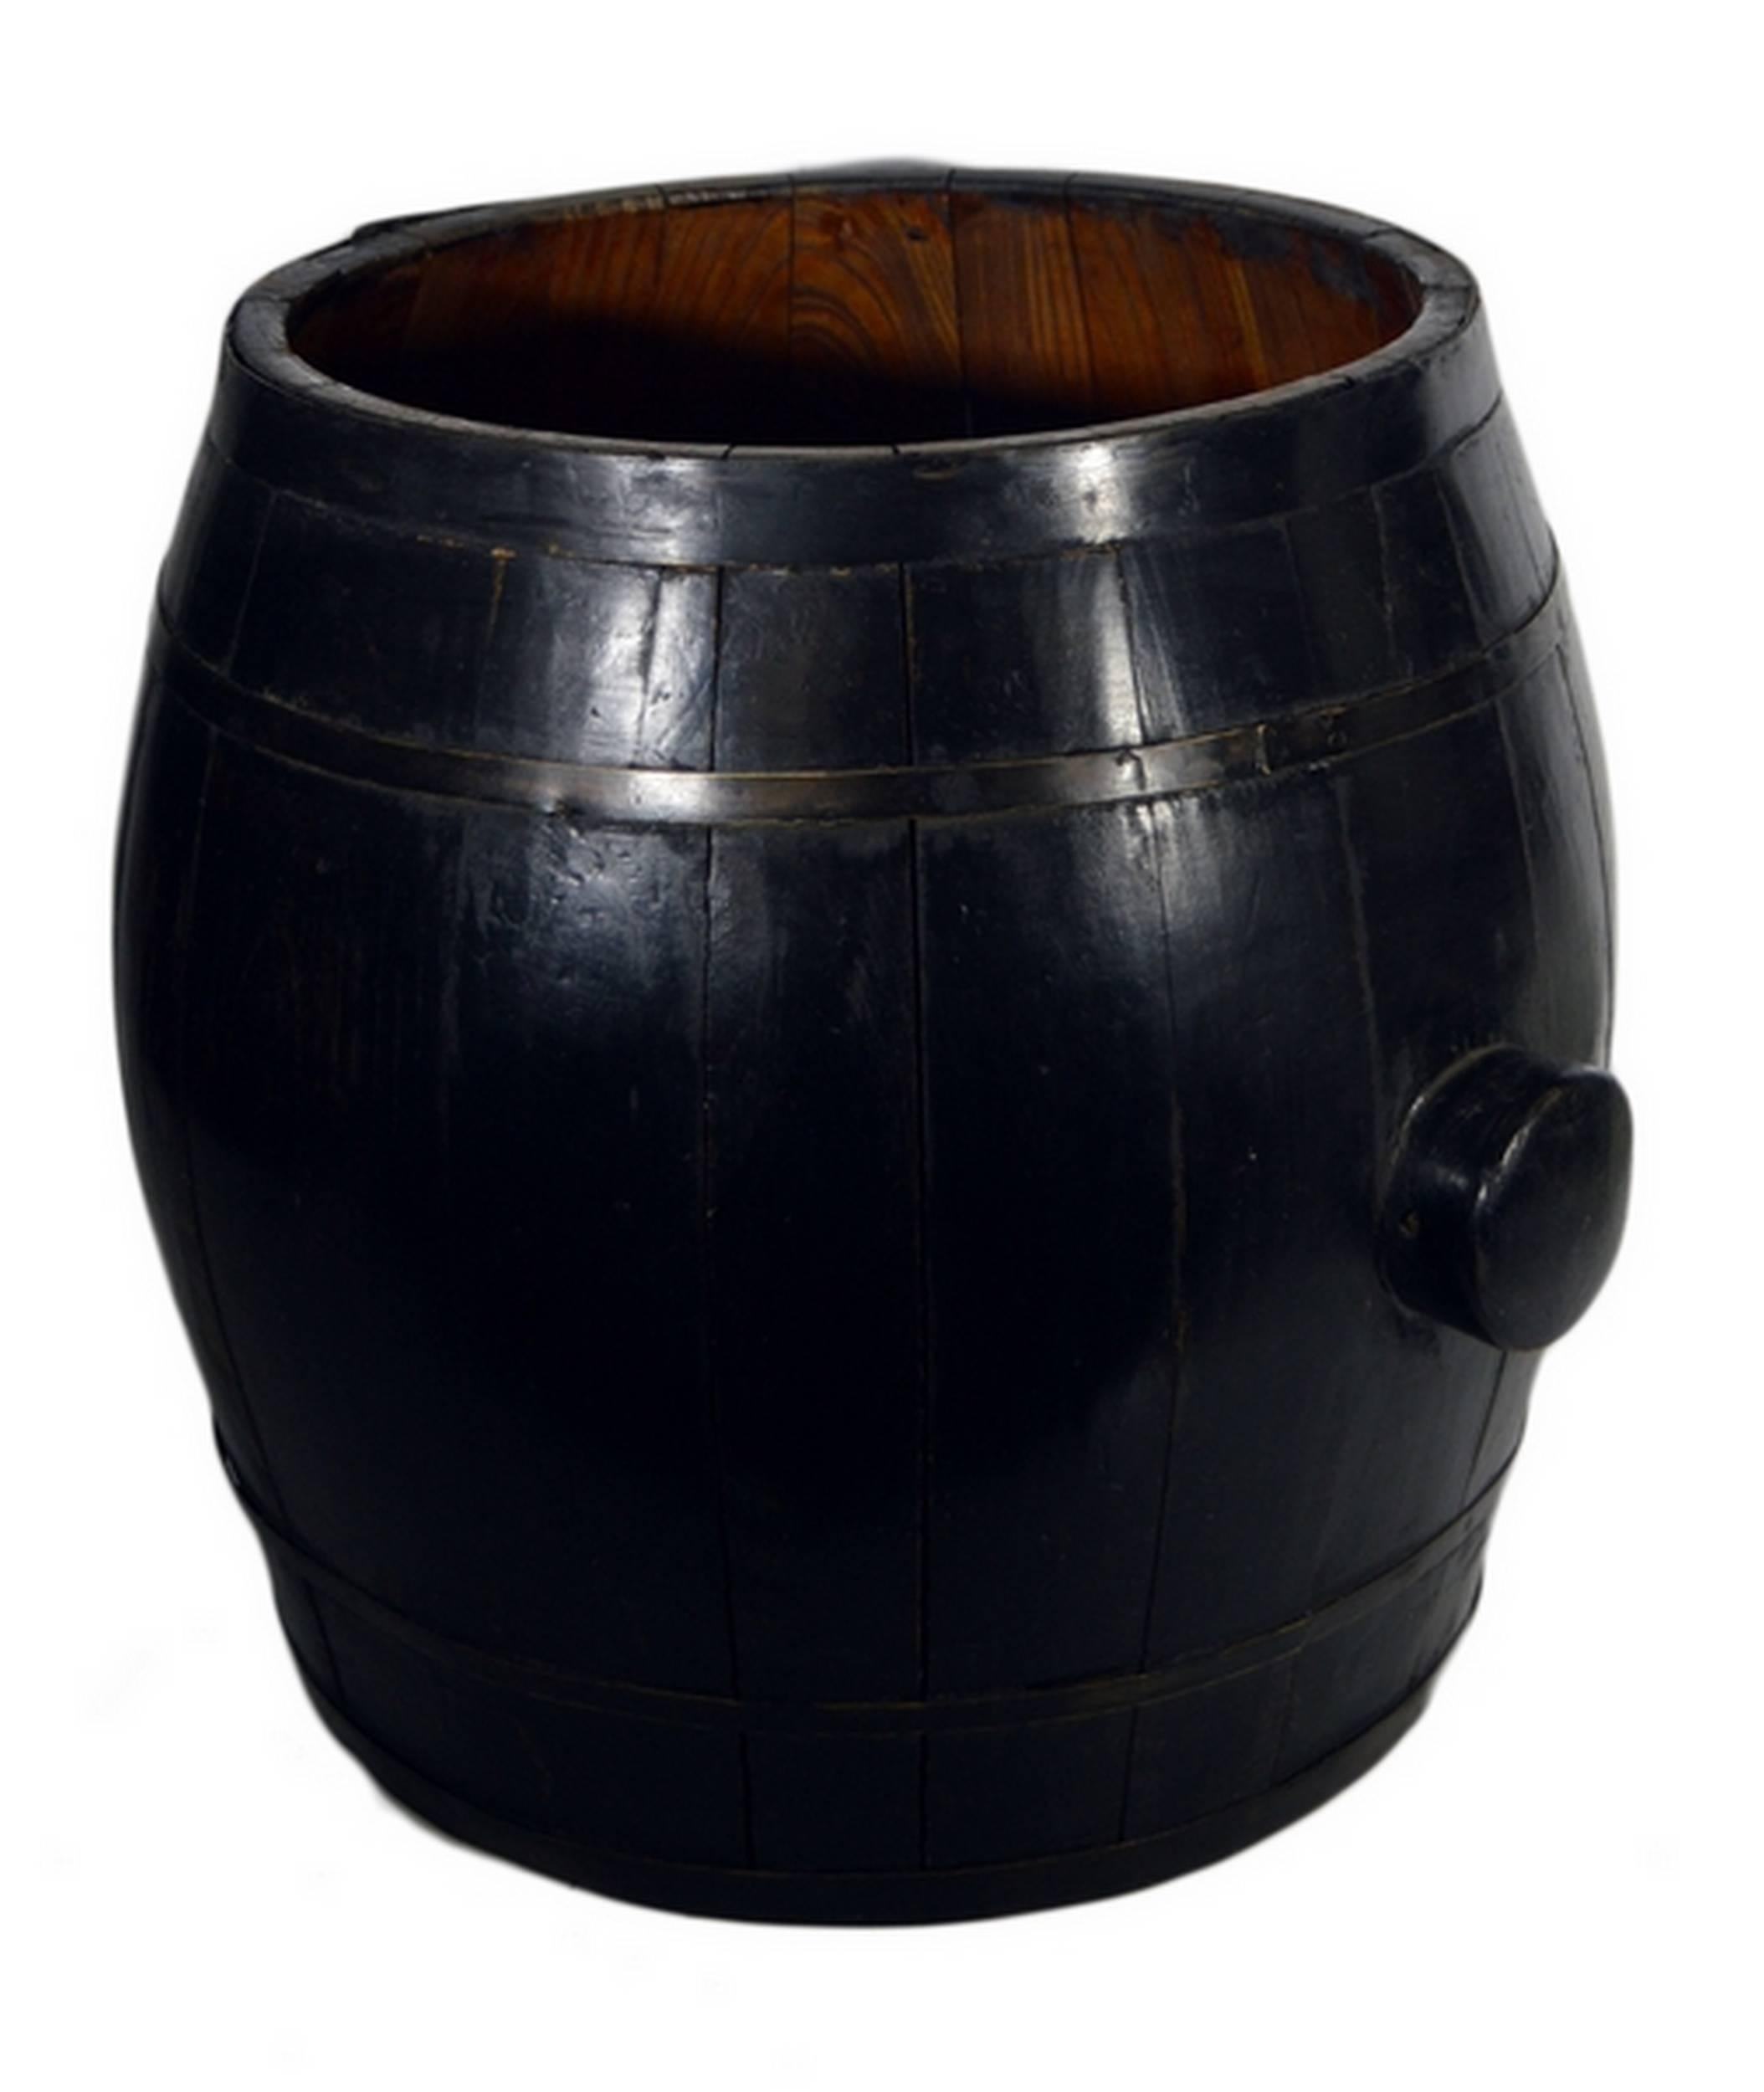 A 19th century Chinese grain barrel handmade with varnished wood. This barrel is made of rounded wood planks reinforced by metallic rings. The sides feature two round handles for lifting. The exterior of this handmade barrel is varnished in a dark